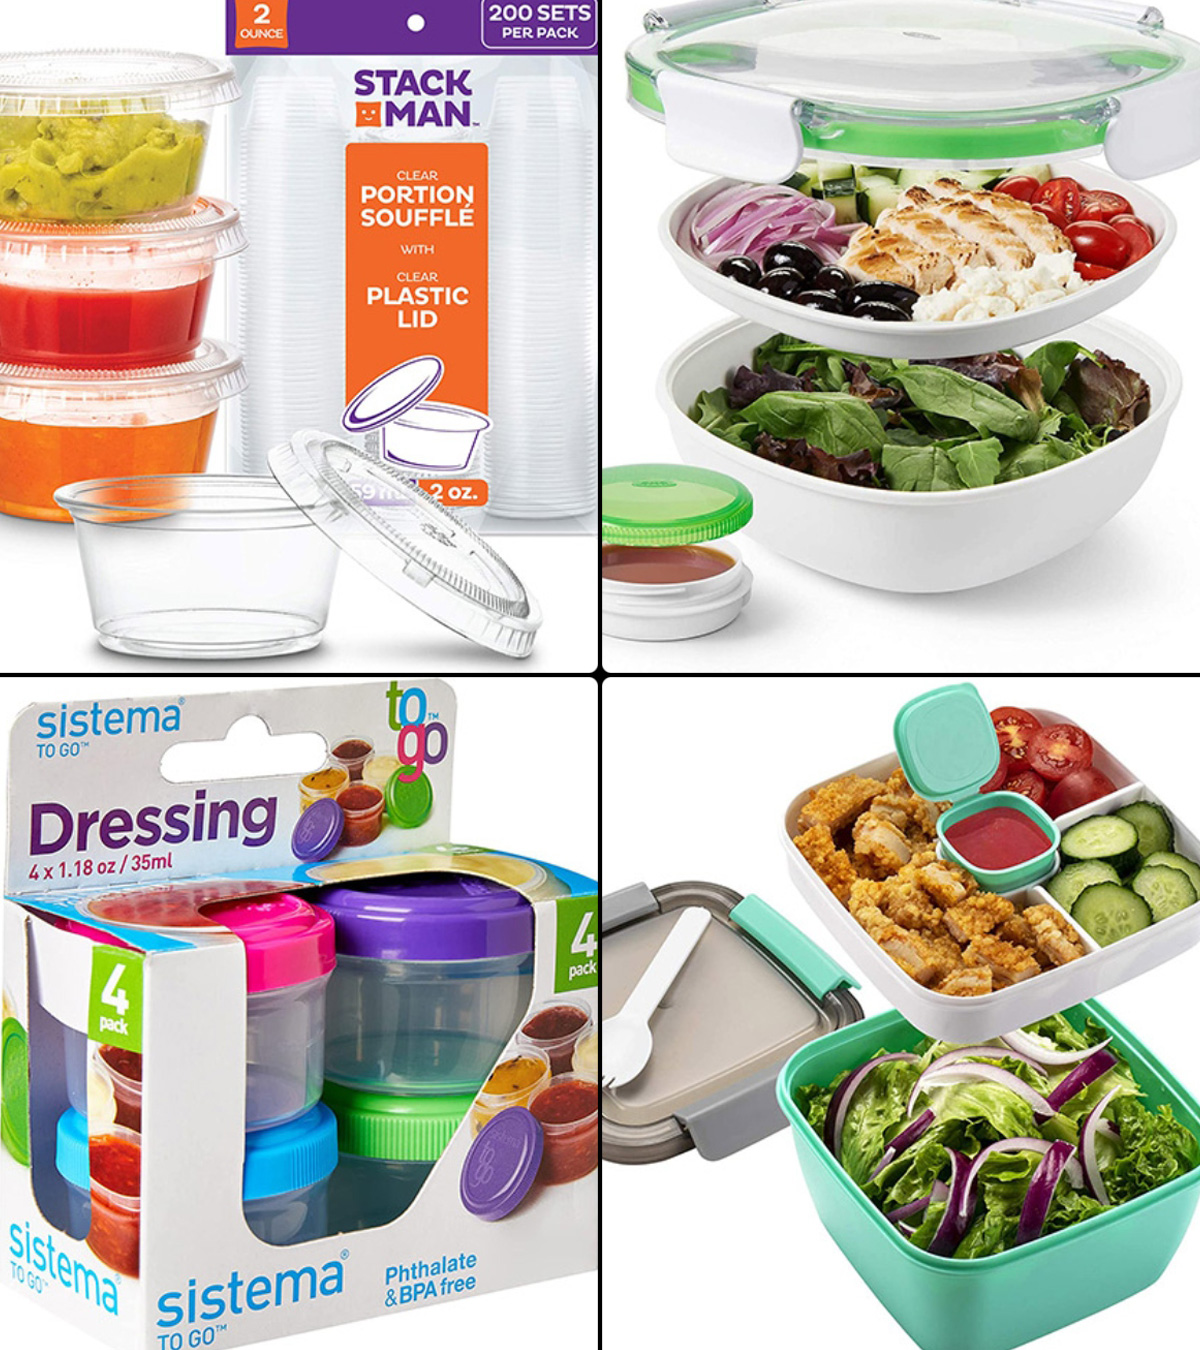 https://www.momjunction.com/wp-content/uploads/2021/07/Best-Salad-Containers-To-buy-In-2021-43-Fun-And-Engaging-Activitie.jpg